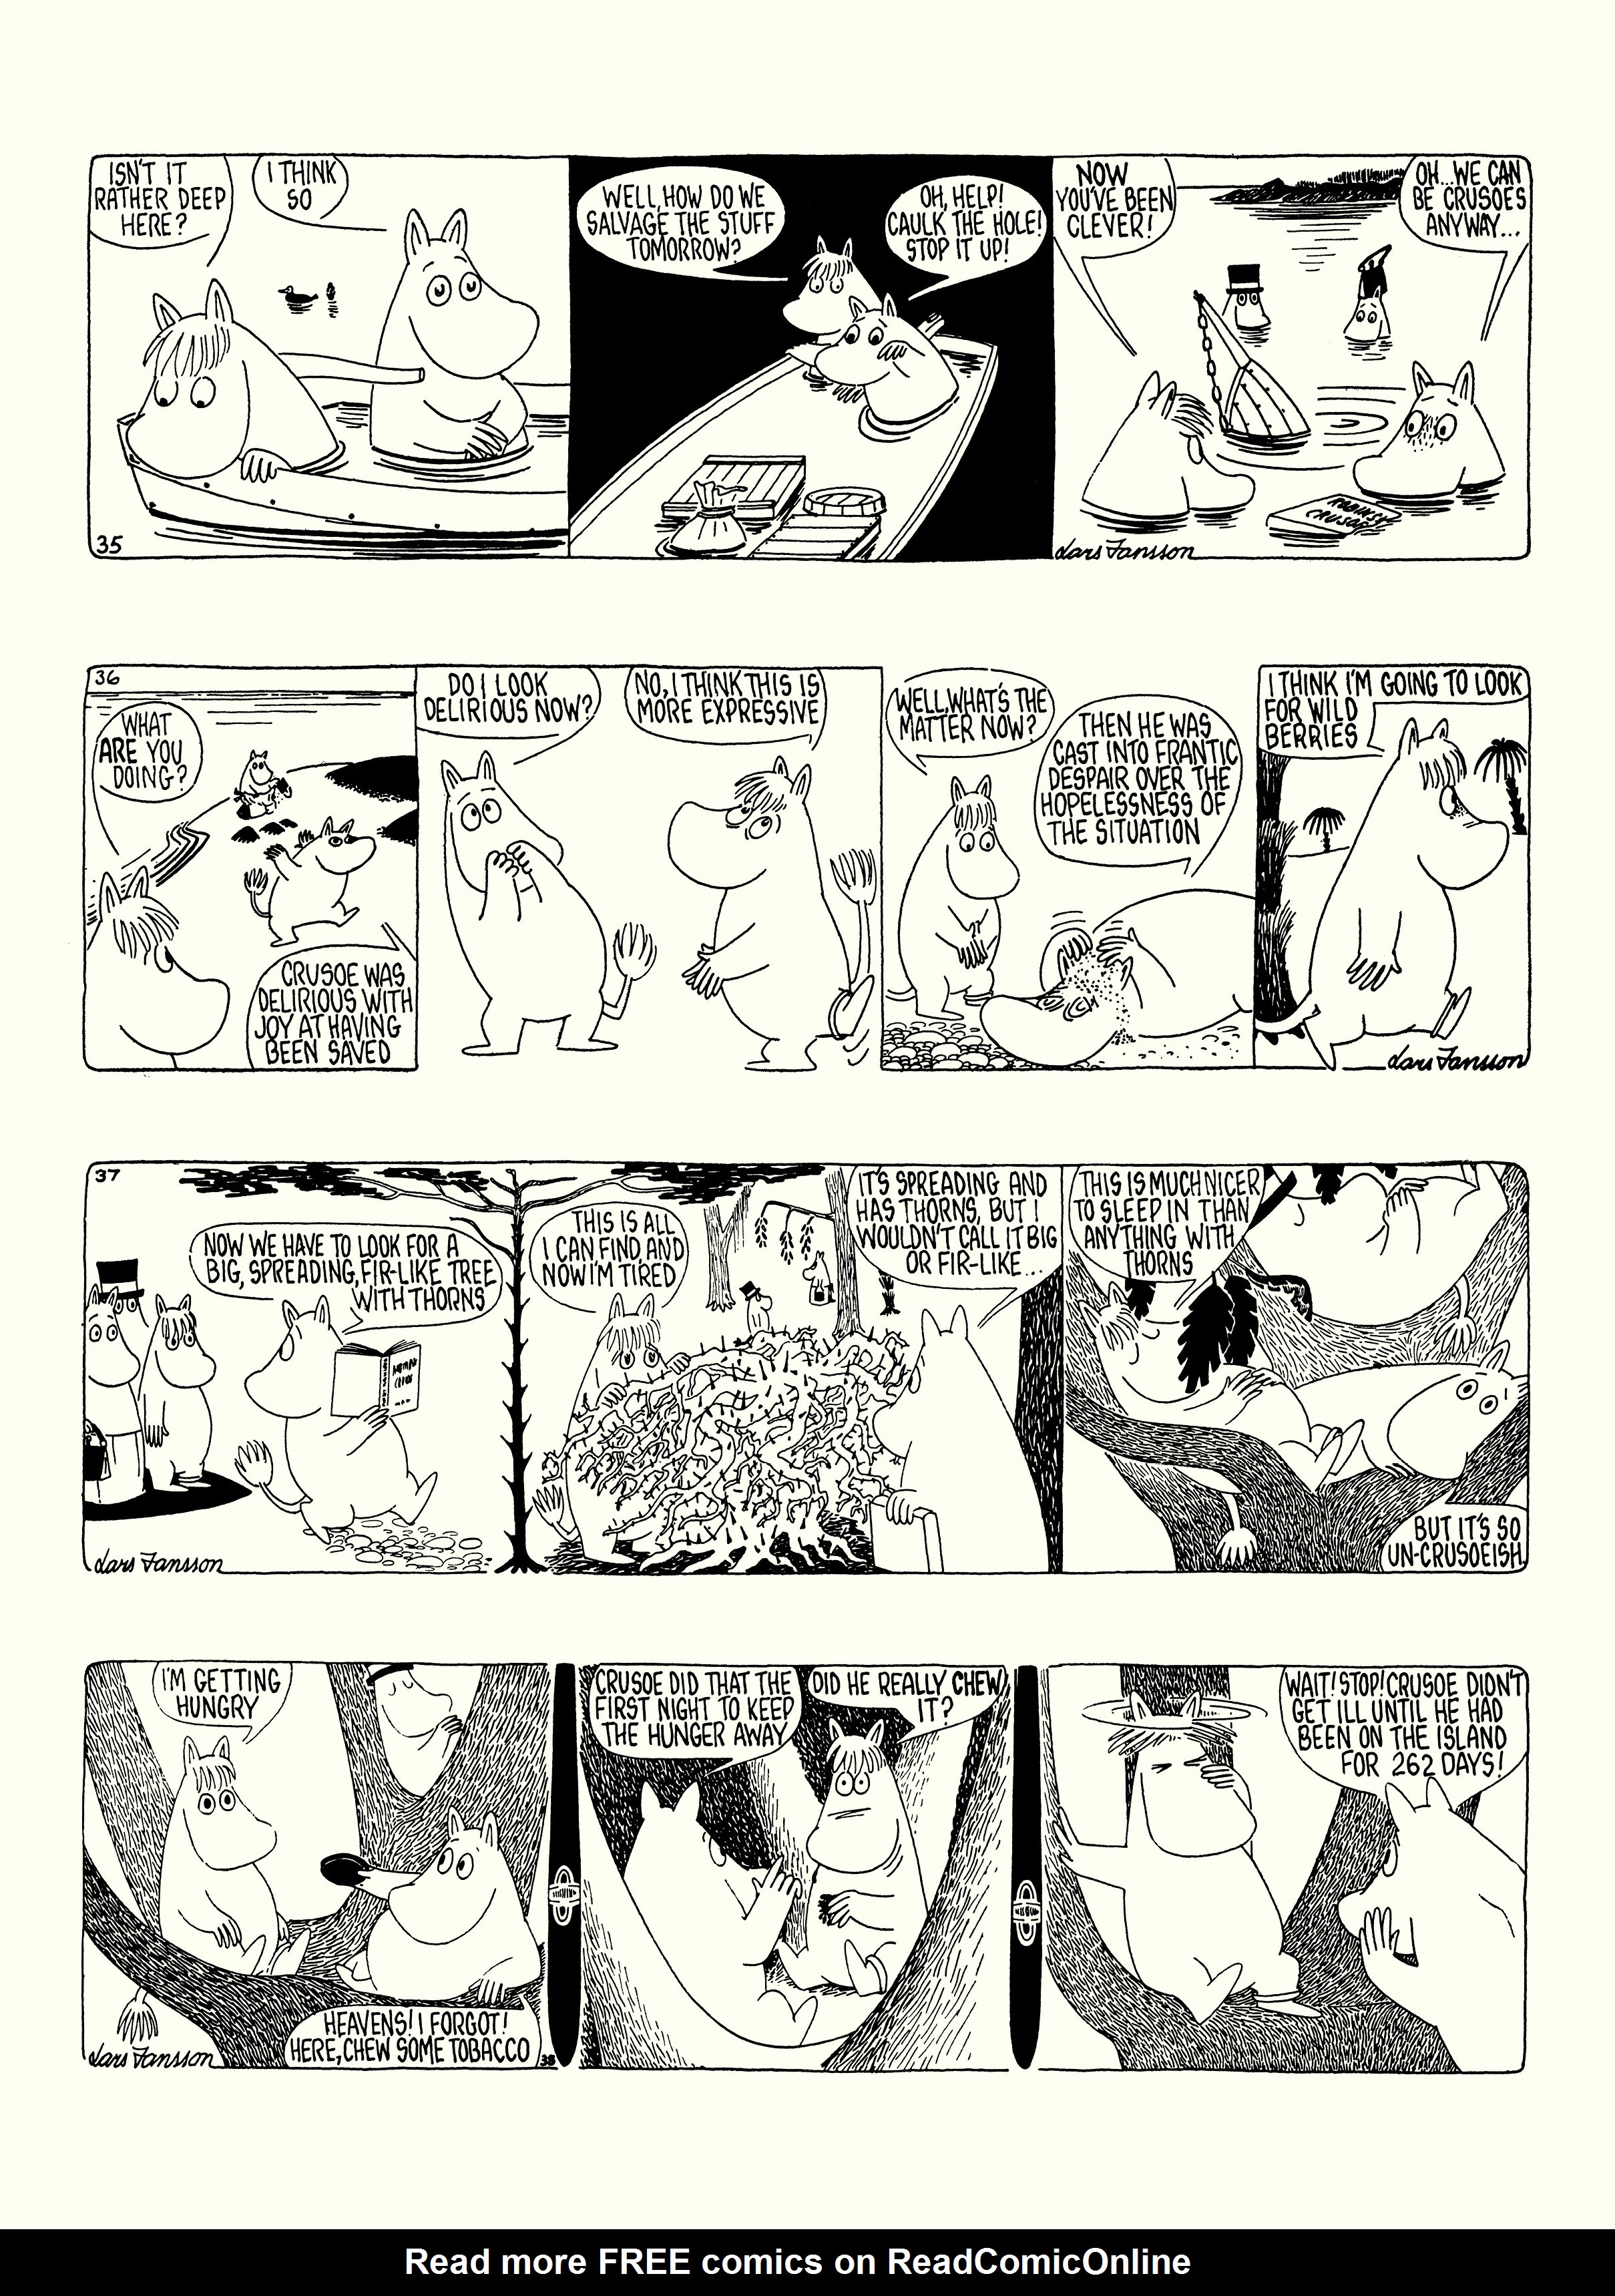 Read online Moomin: The Complete Lars Jansson Comic Strip comic -  Issue # TPB 8 - 14